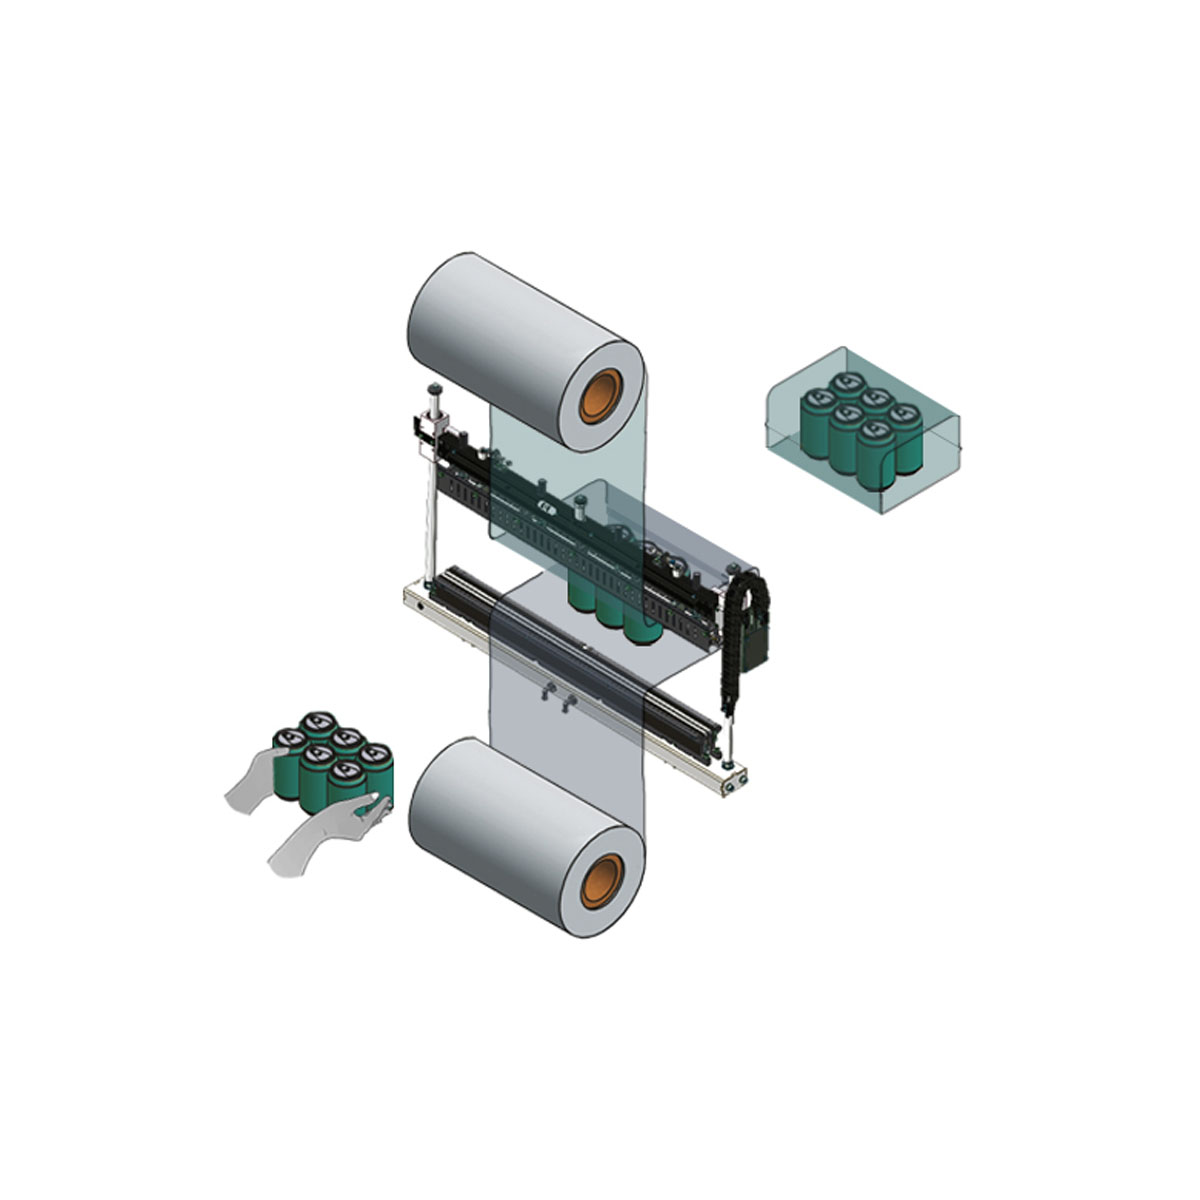 Buy Bundle Wrapper Semi-automatic  in Bundle Wrappers from Smipack available at Astrolift NZ